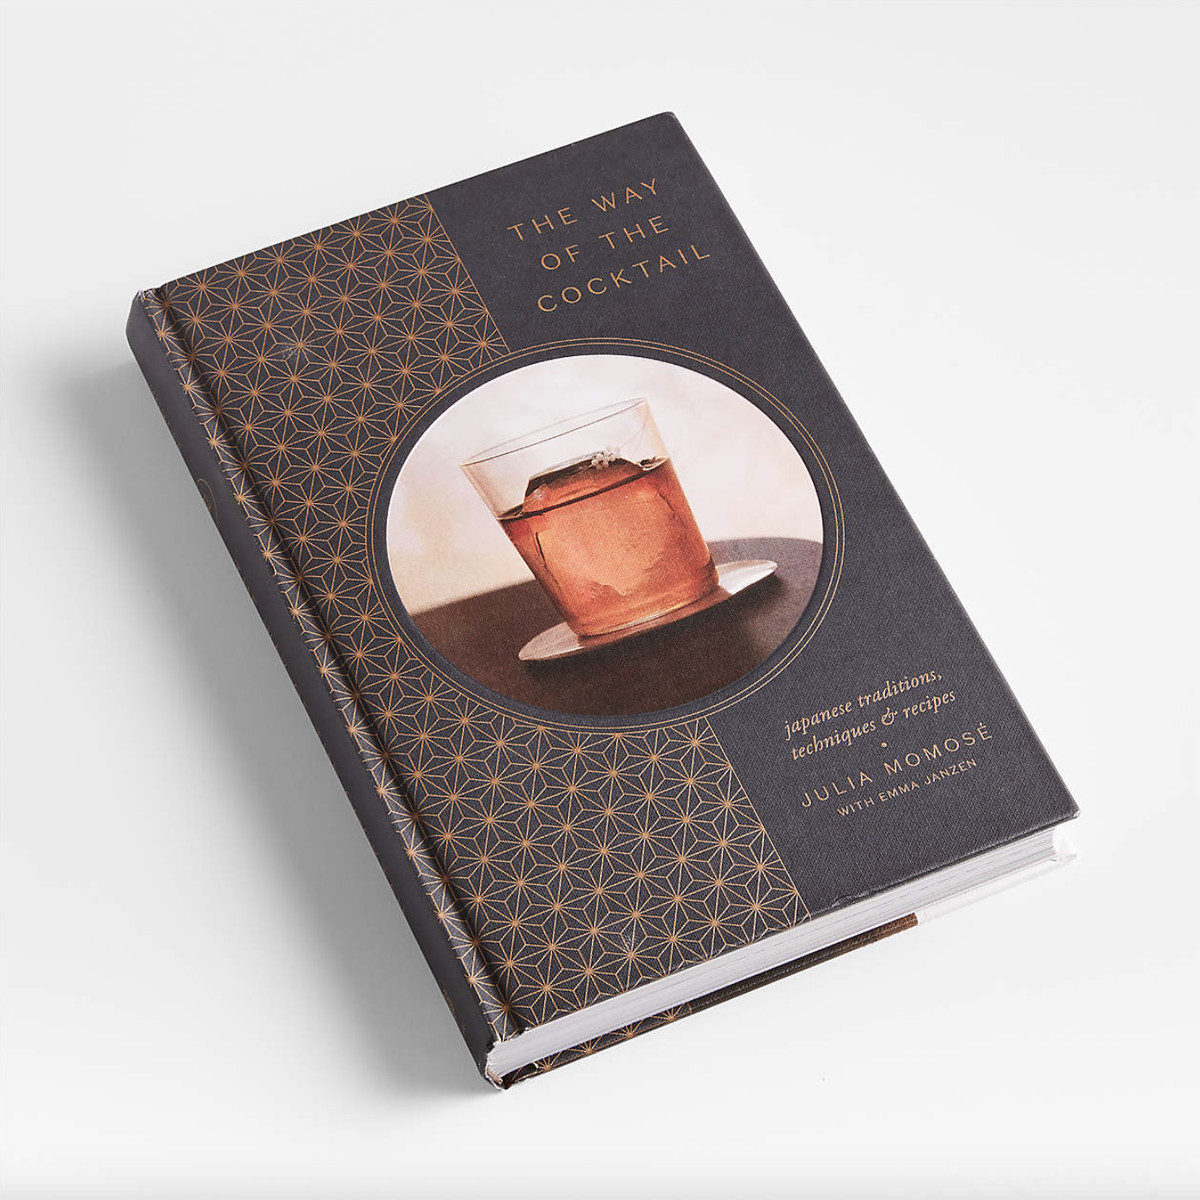 A grey book titled “The Way of the Cocktail.”